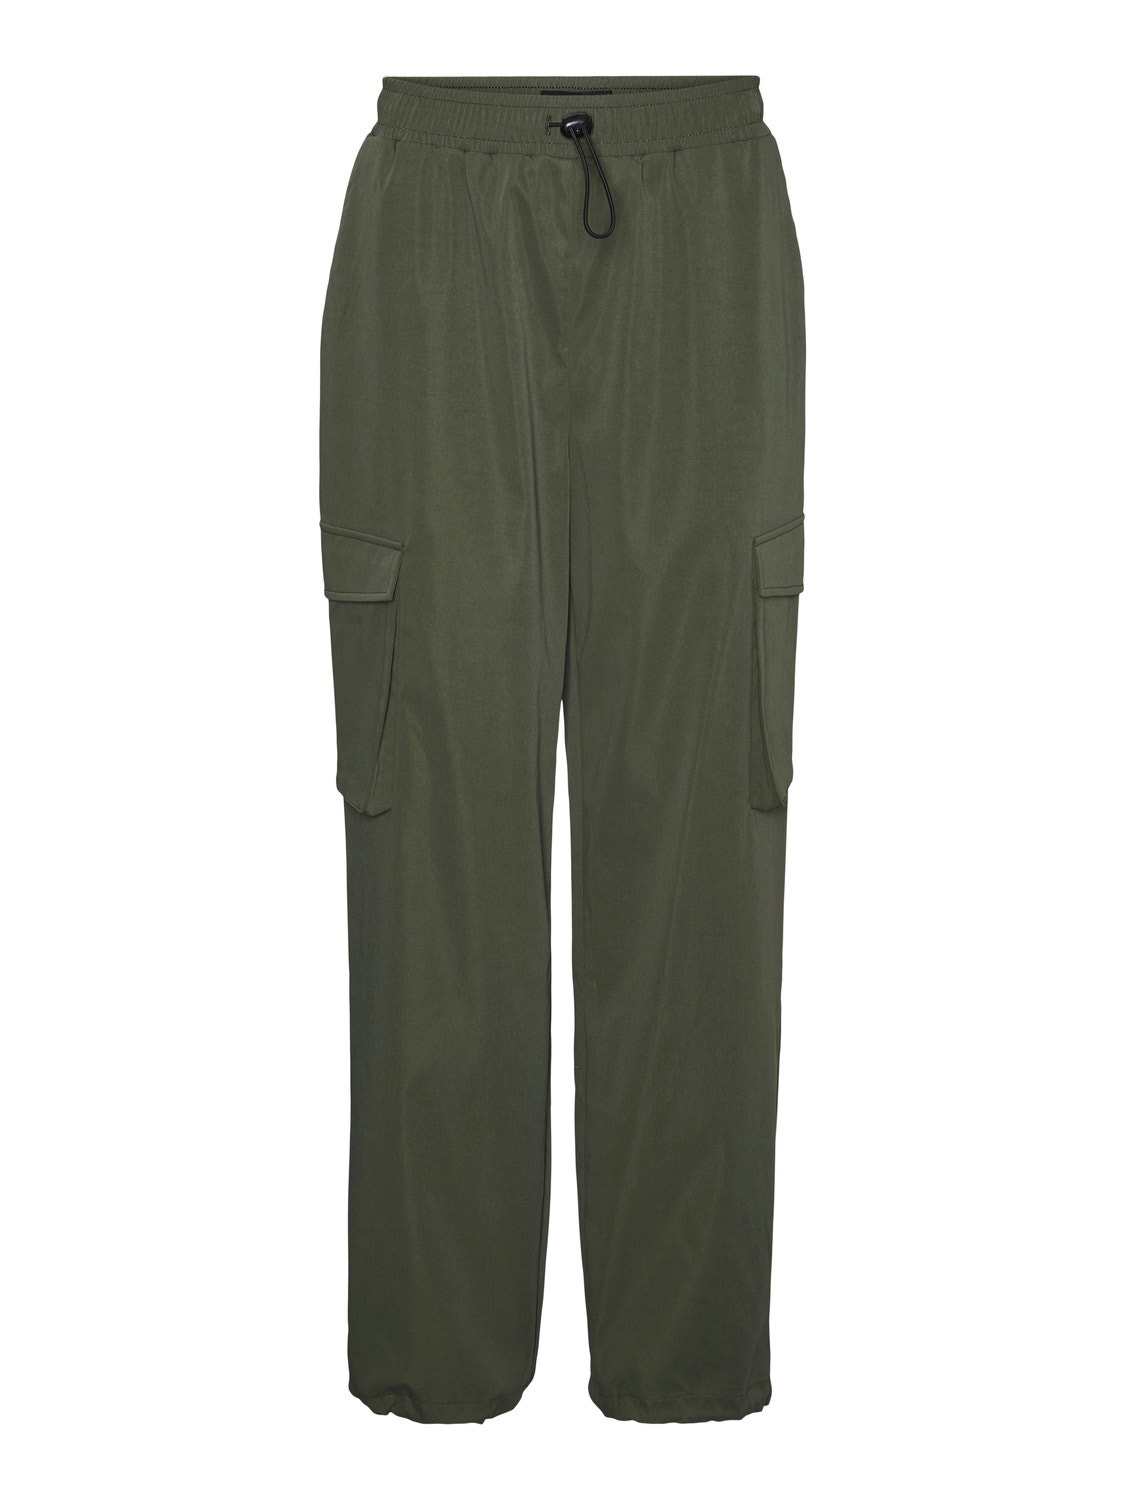 Loose Fit High rise Cargo Trousers with 25% discount! | Vero Moda®